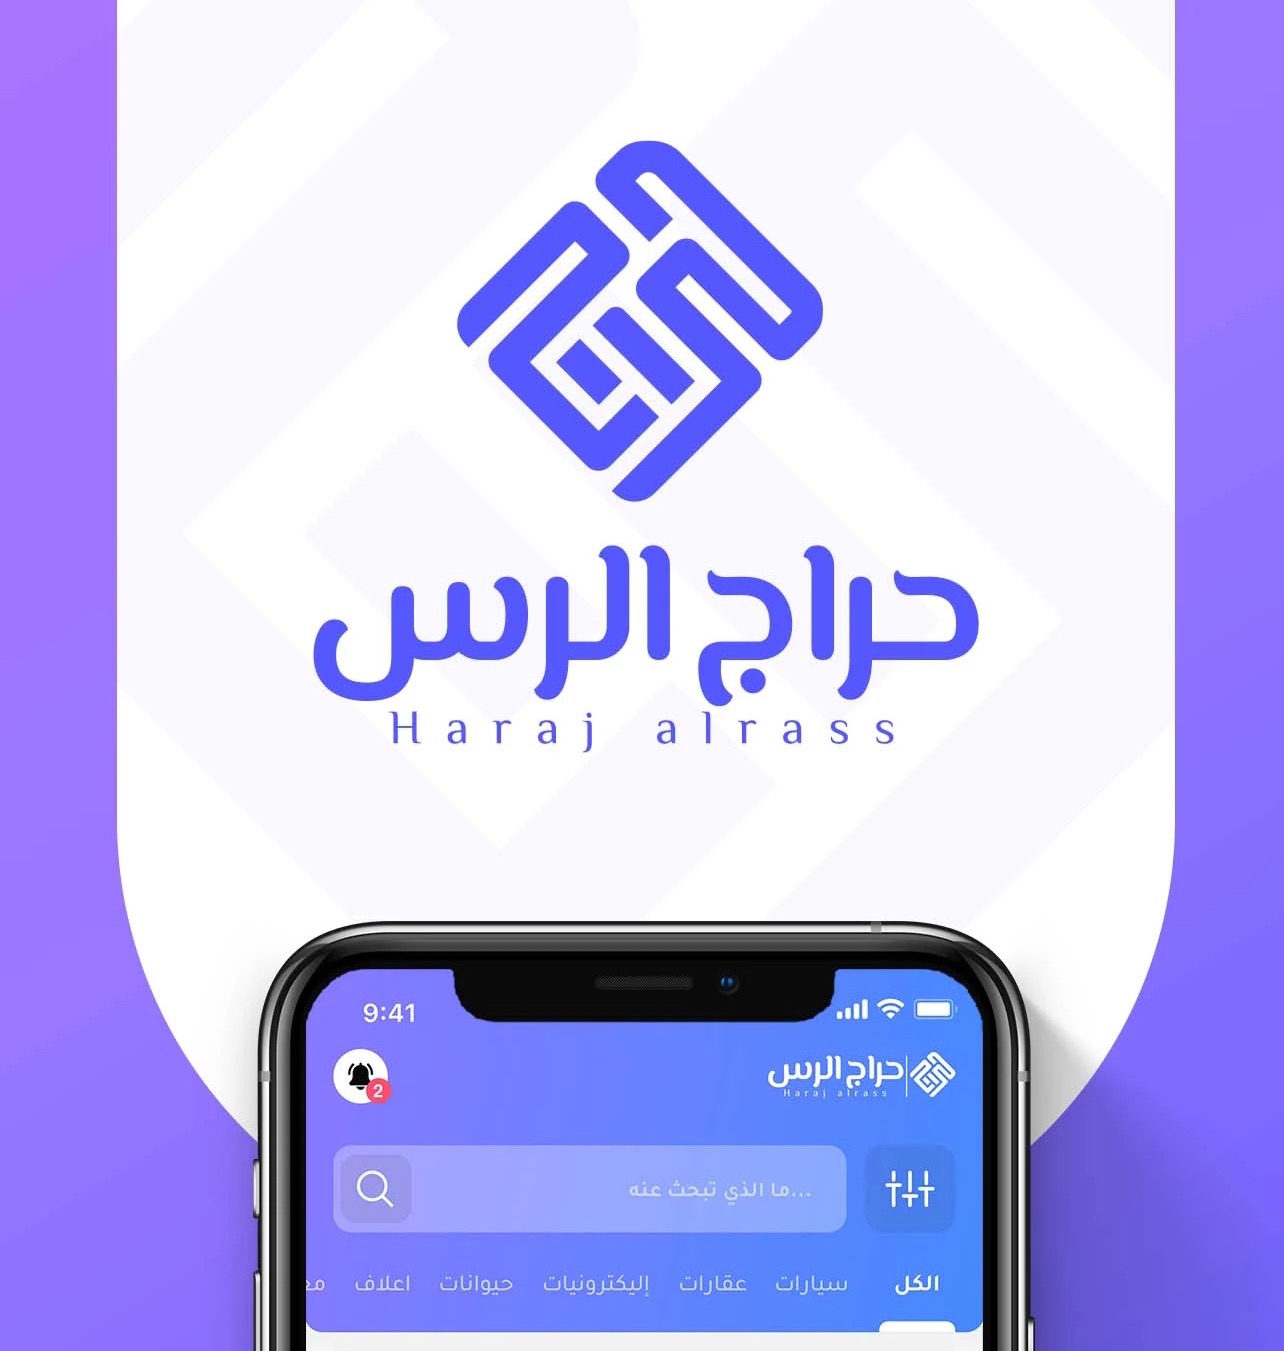 Buy and sell various goods conveniently with Haraj Al-Rass app.